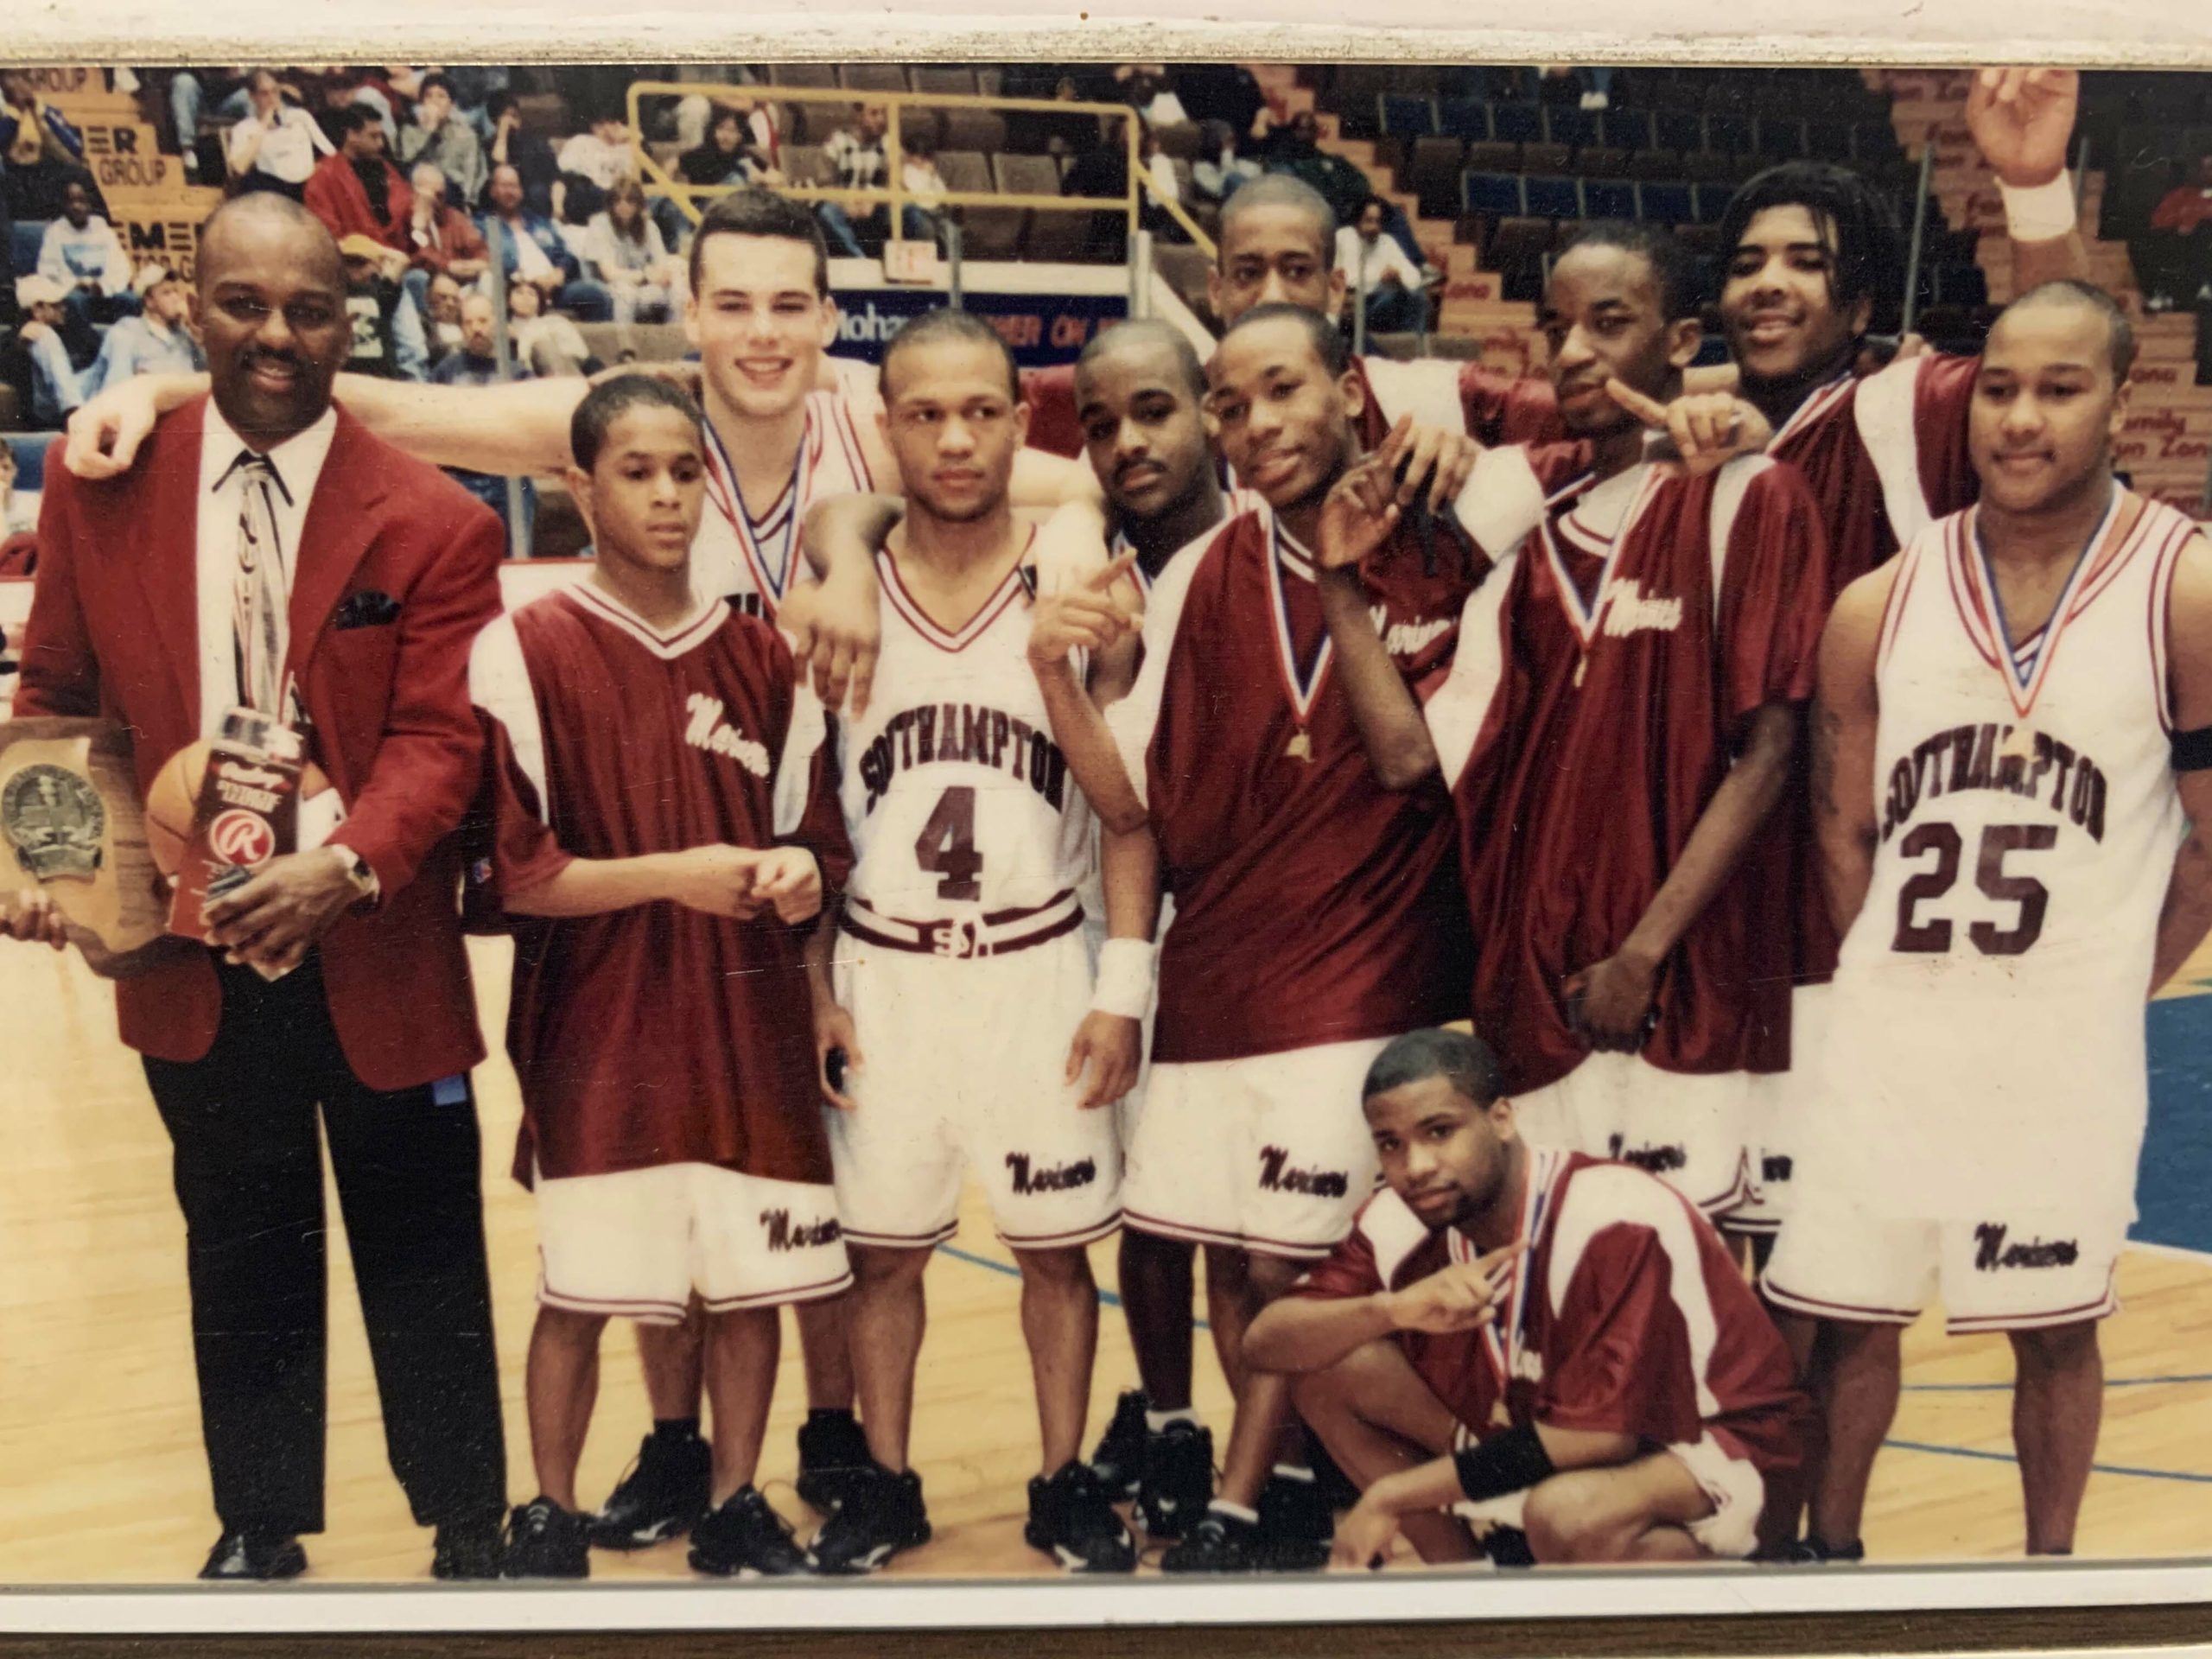 Courtney Pritchard, fifth from left, with his Southampton teammates and head coach Herm Lamison (far left) after winning the New York State Class B Championship in 2000.